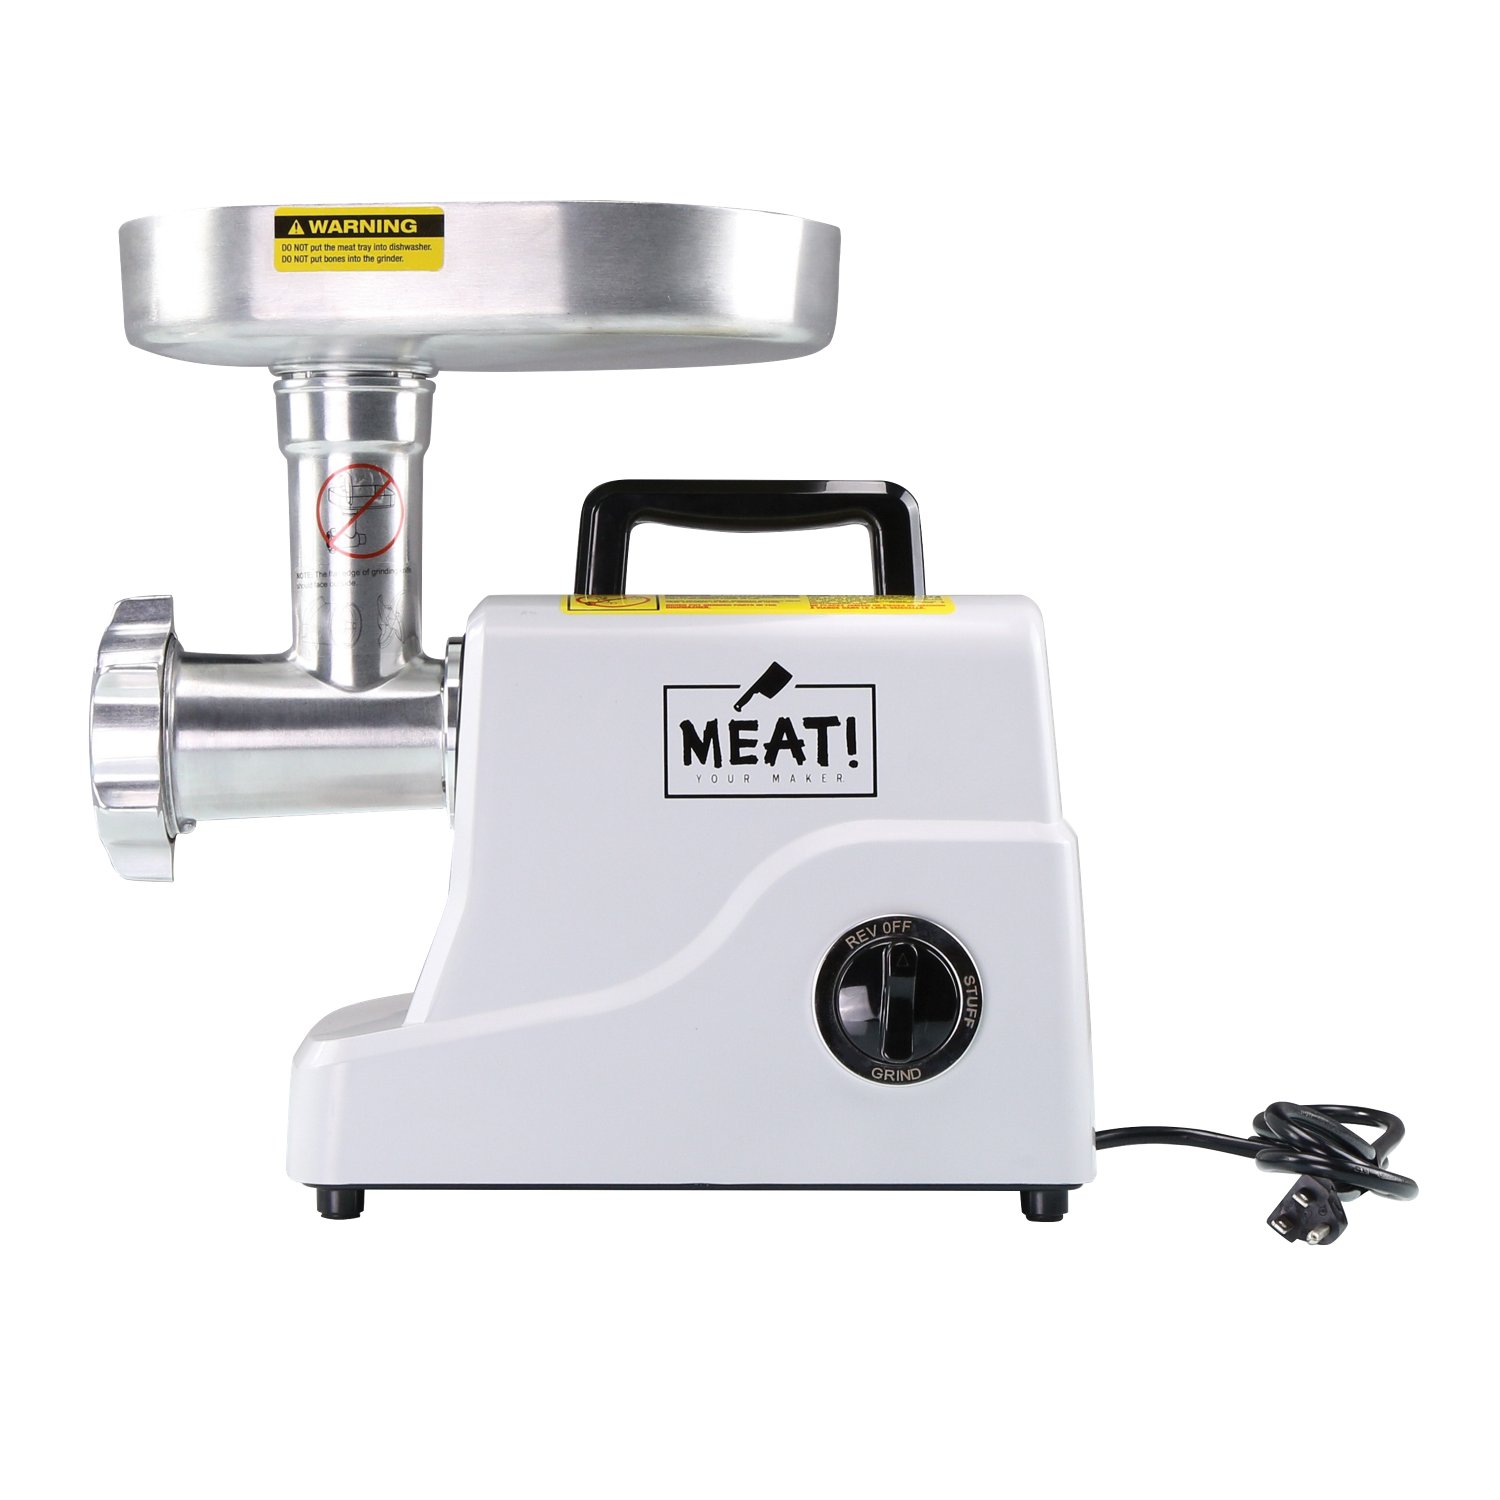 https://academy.scene7.com/is/image/academy//game---food-processing/meat-500-watt-12-grinder-1117072-/fc97734331f54818a57f1ede5902e79d?$d-plp-product-image$